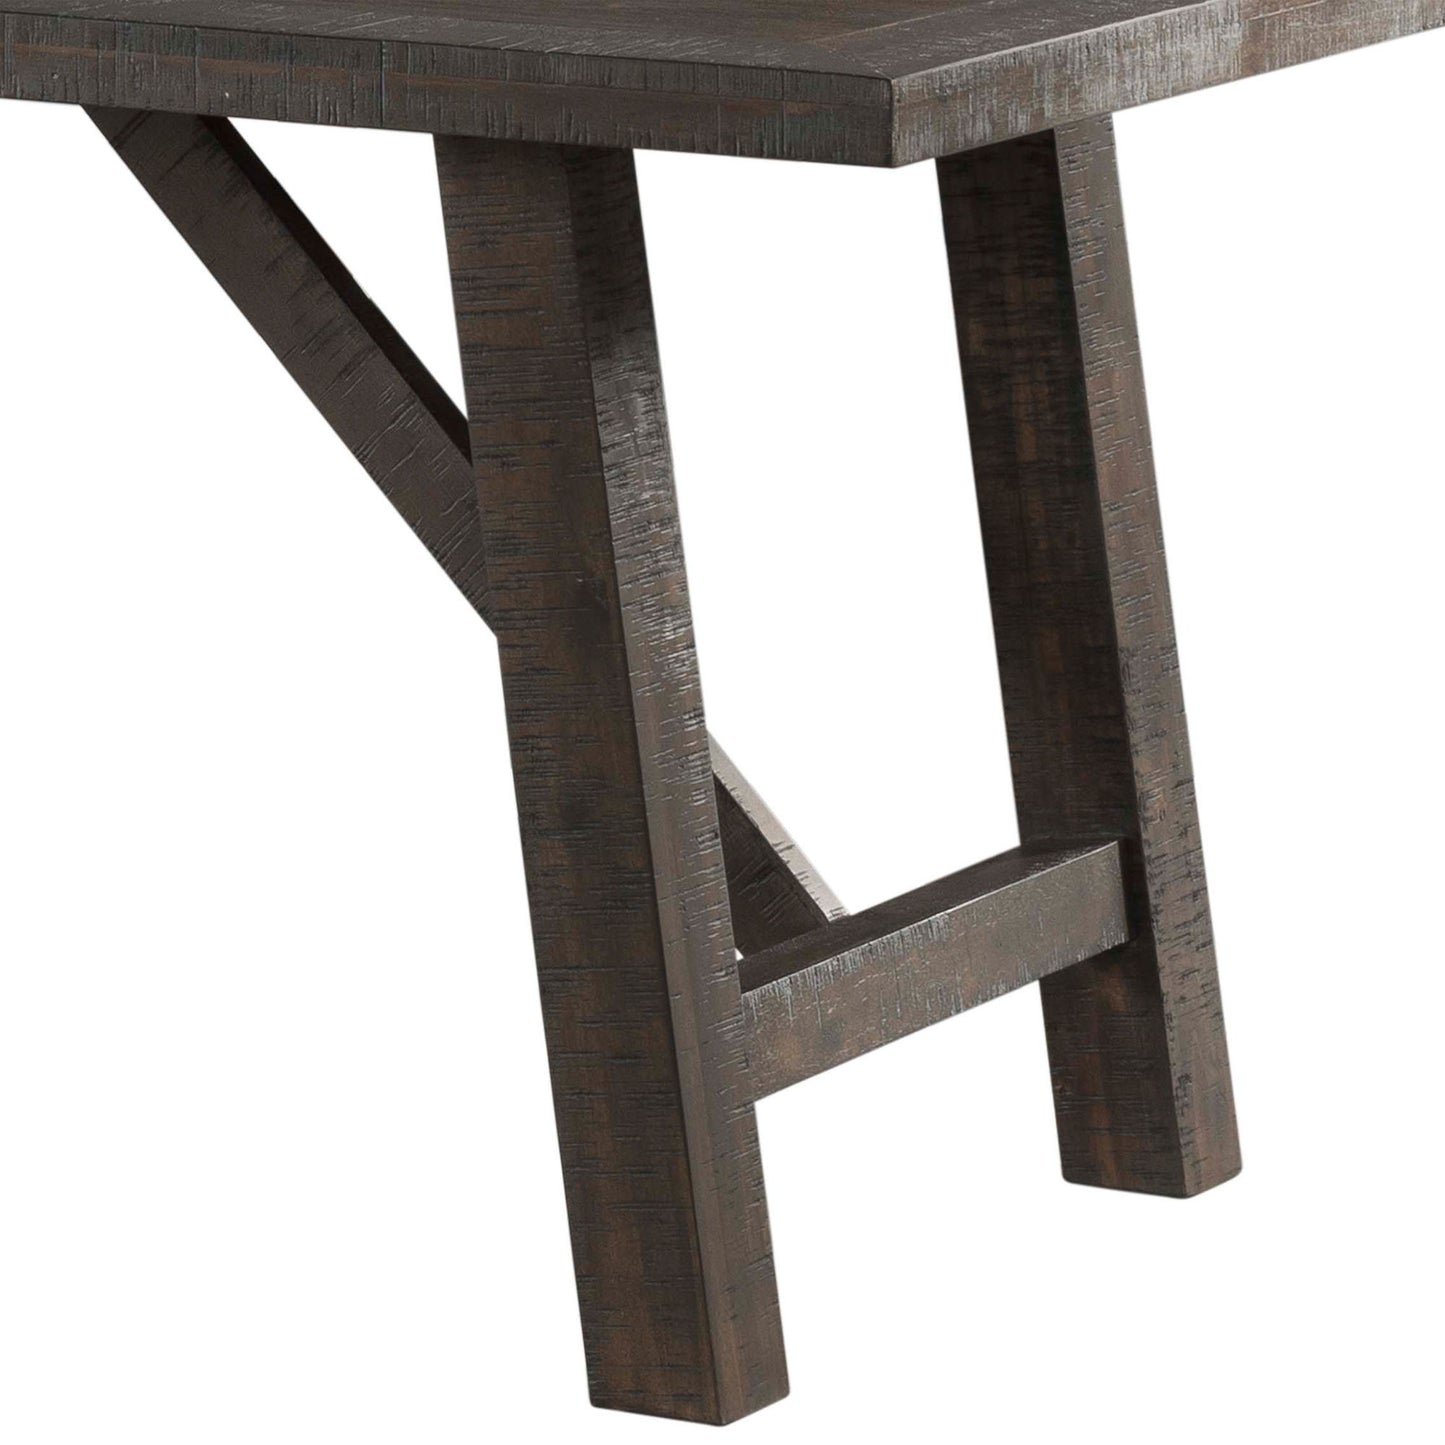 Cash - Dining Table